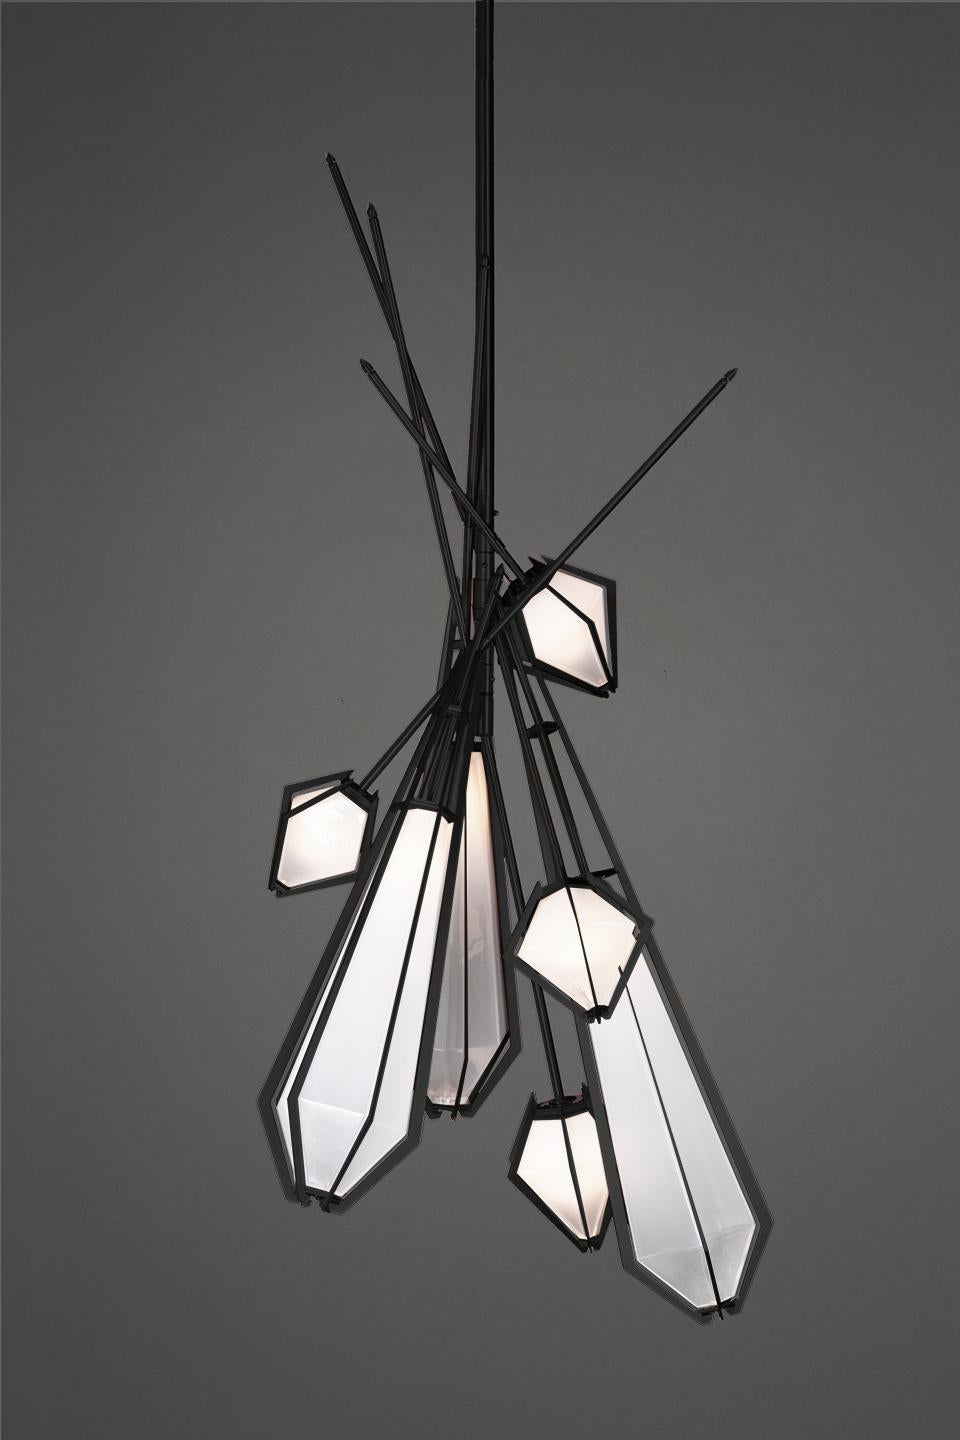 Harlow Dried flowers is an elegant sculptural light fixture inspired by jewelry design featuring a mold-blown glass gem in a chic metallic setting to create an asymmetrical starburst of light. Harlow is available in various color ways, and held in a